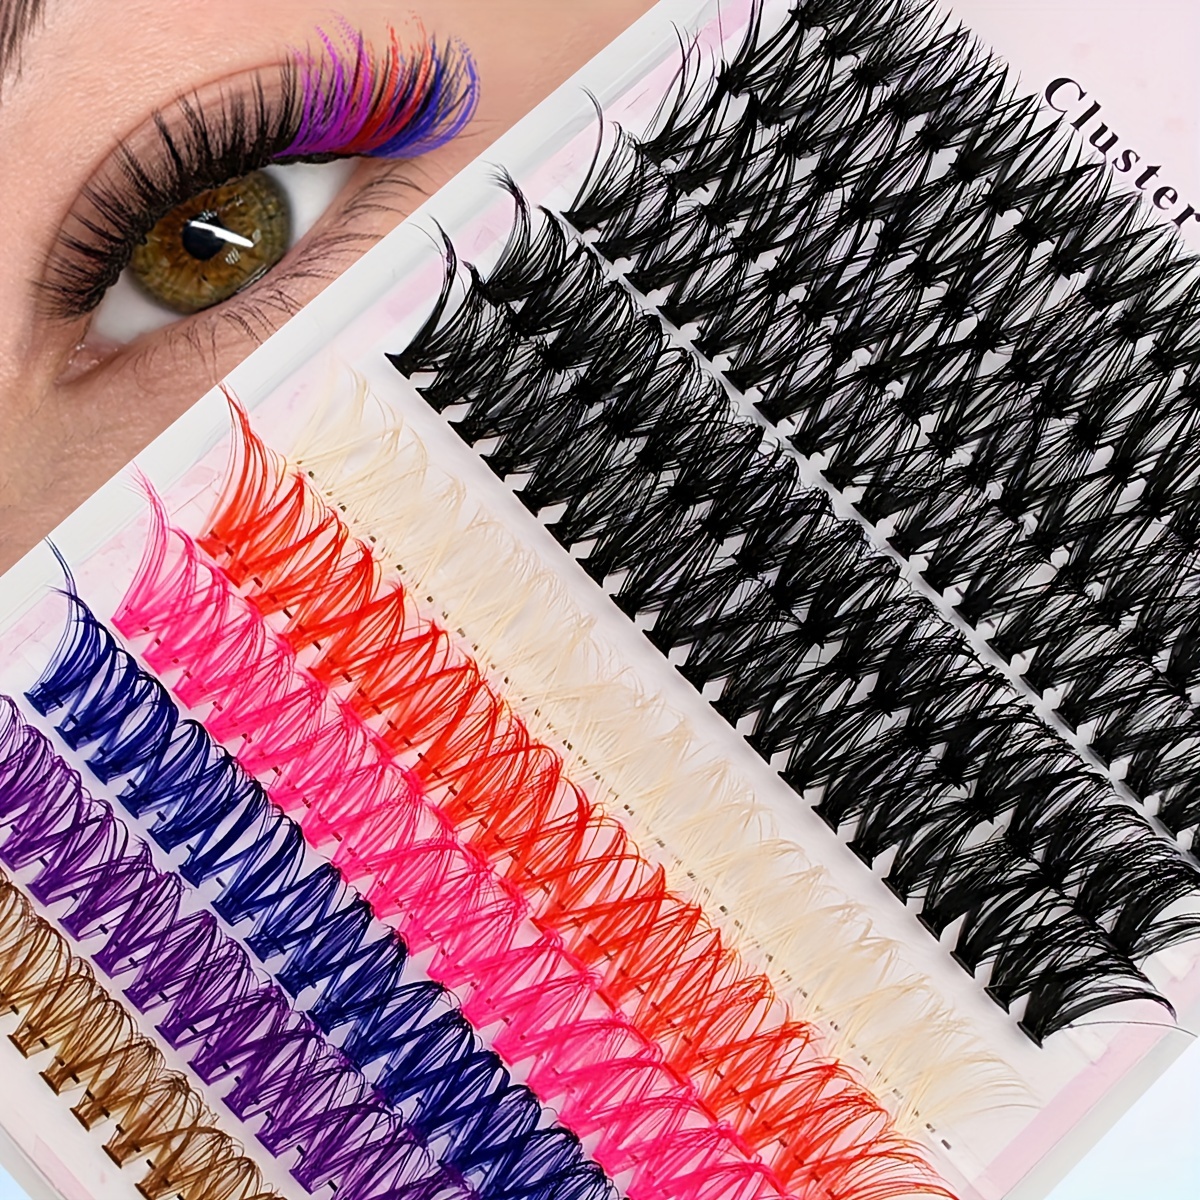 

240pcs Colorful Lash Clusters - Fluffy & Wispy, 50d Volume, D , Mixed Lengths (12mm-16mm), Diy At Home Eyelash Extensions In 6 Vibrant Colors